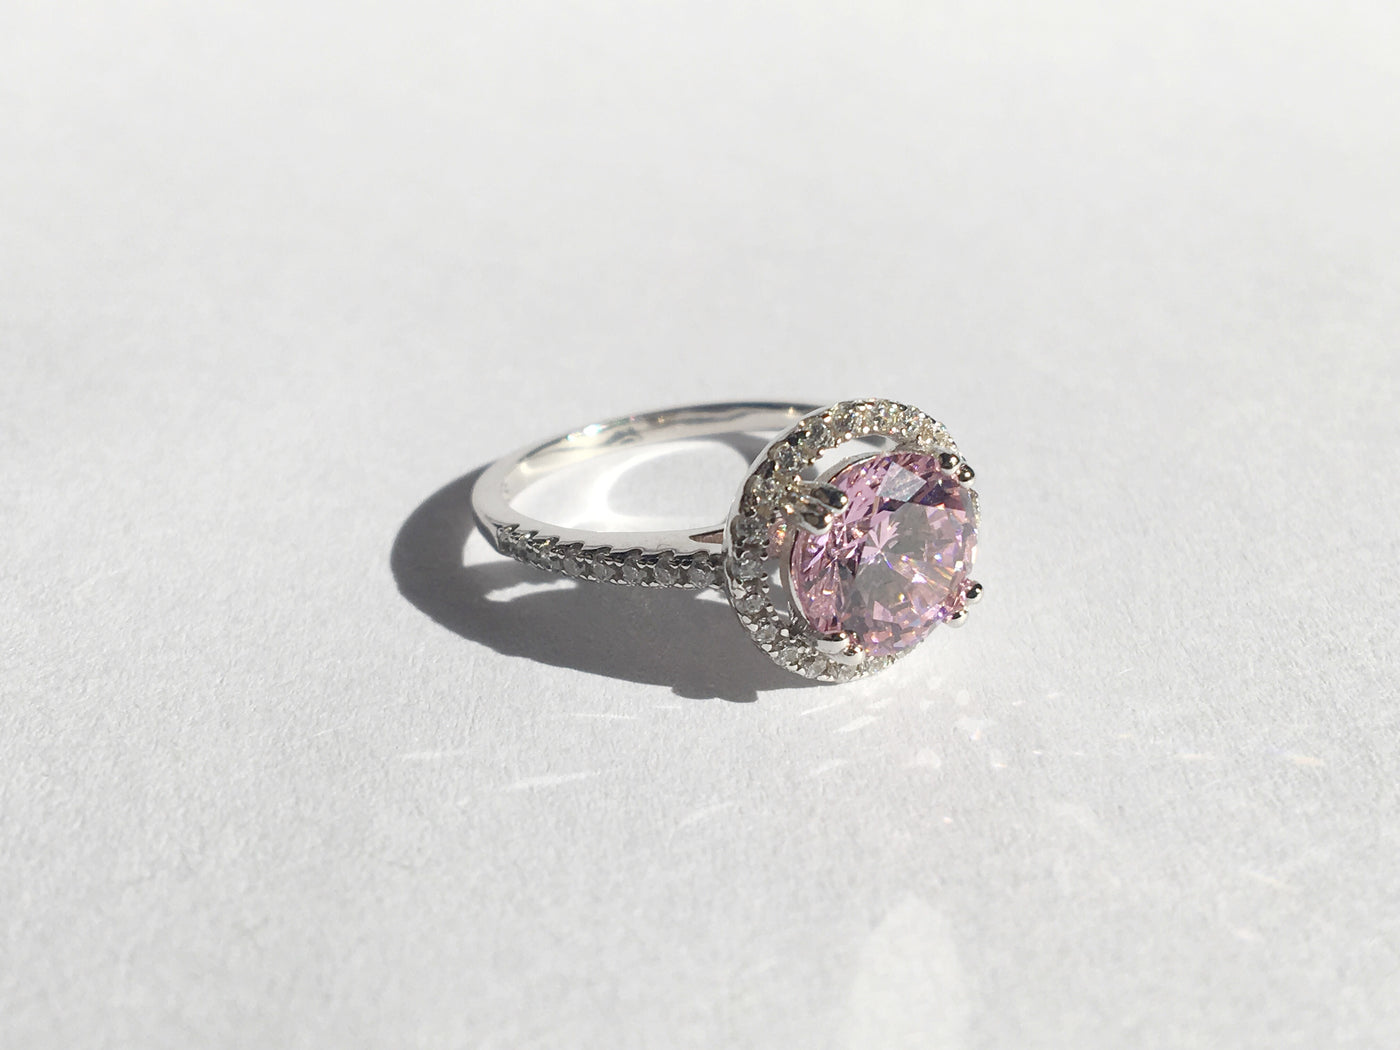 Round Cut Sterling Silver "Eve" Ring with Halo Setting in Pink